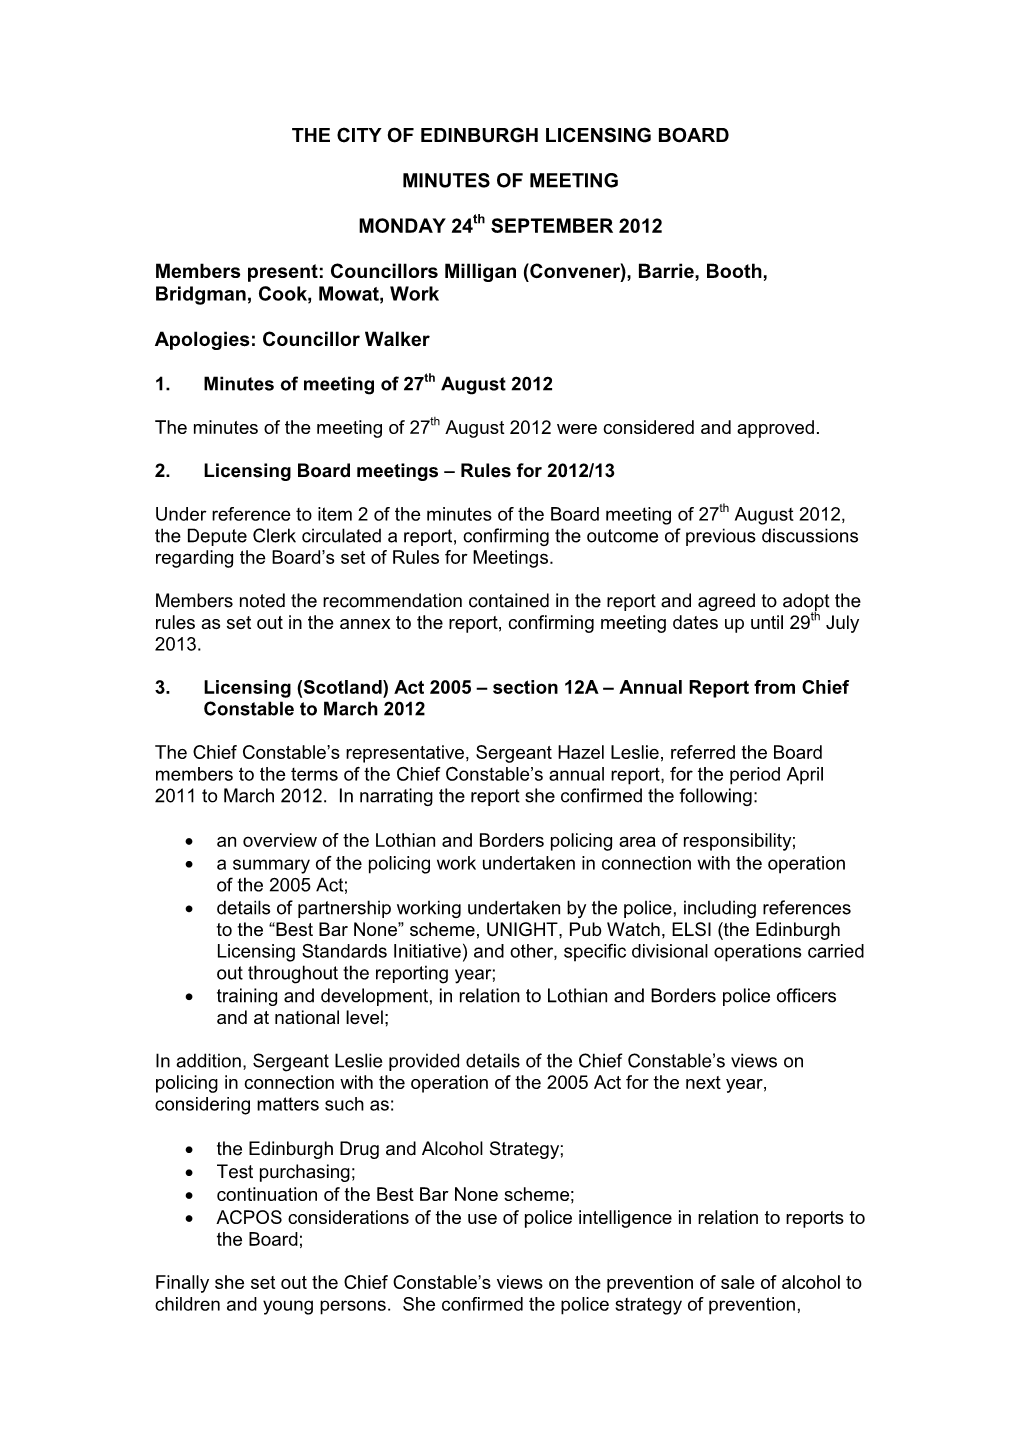 The City of Edinburgh Licensing Board Minutes of Meeting Monday 24